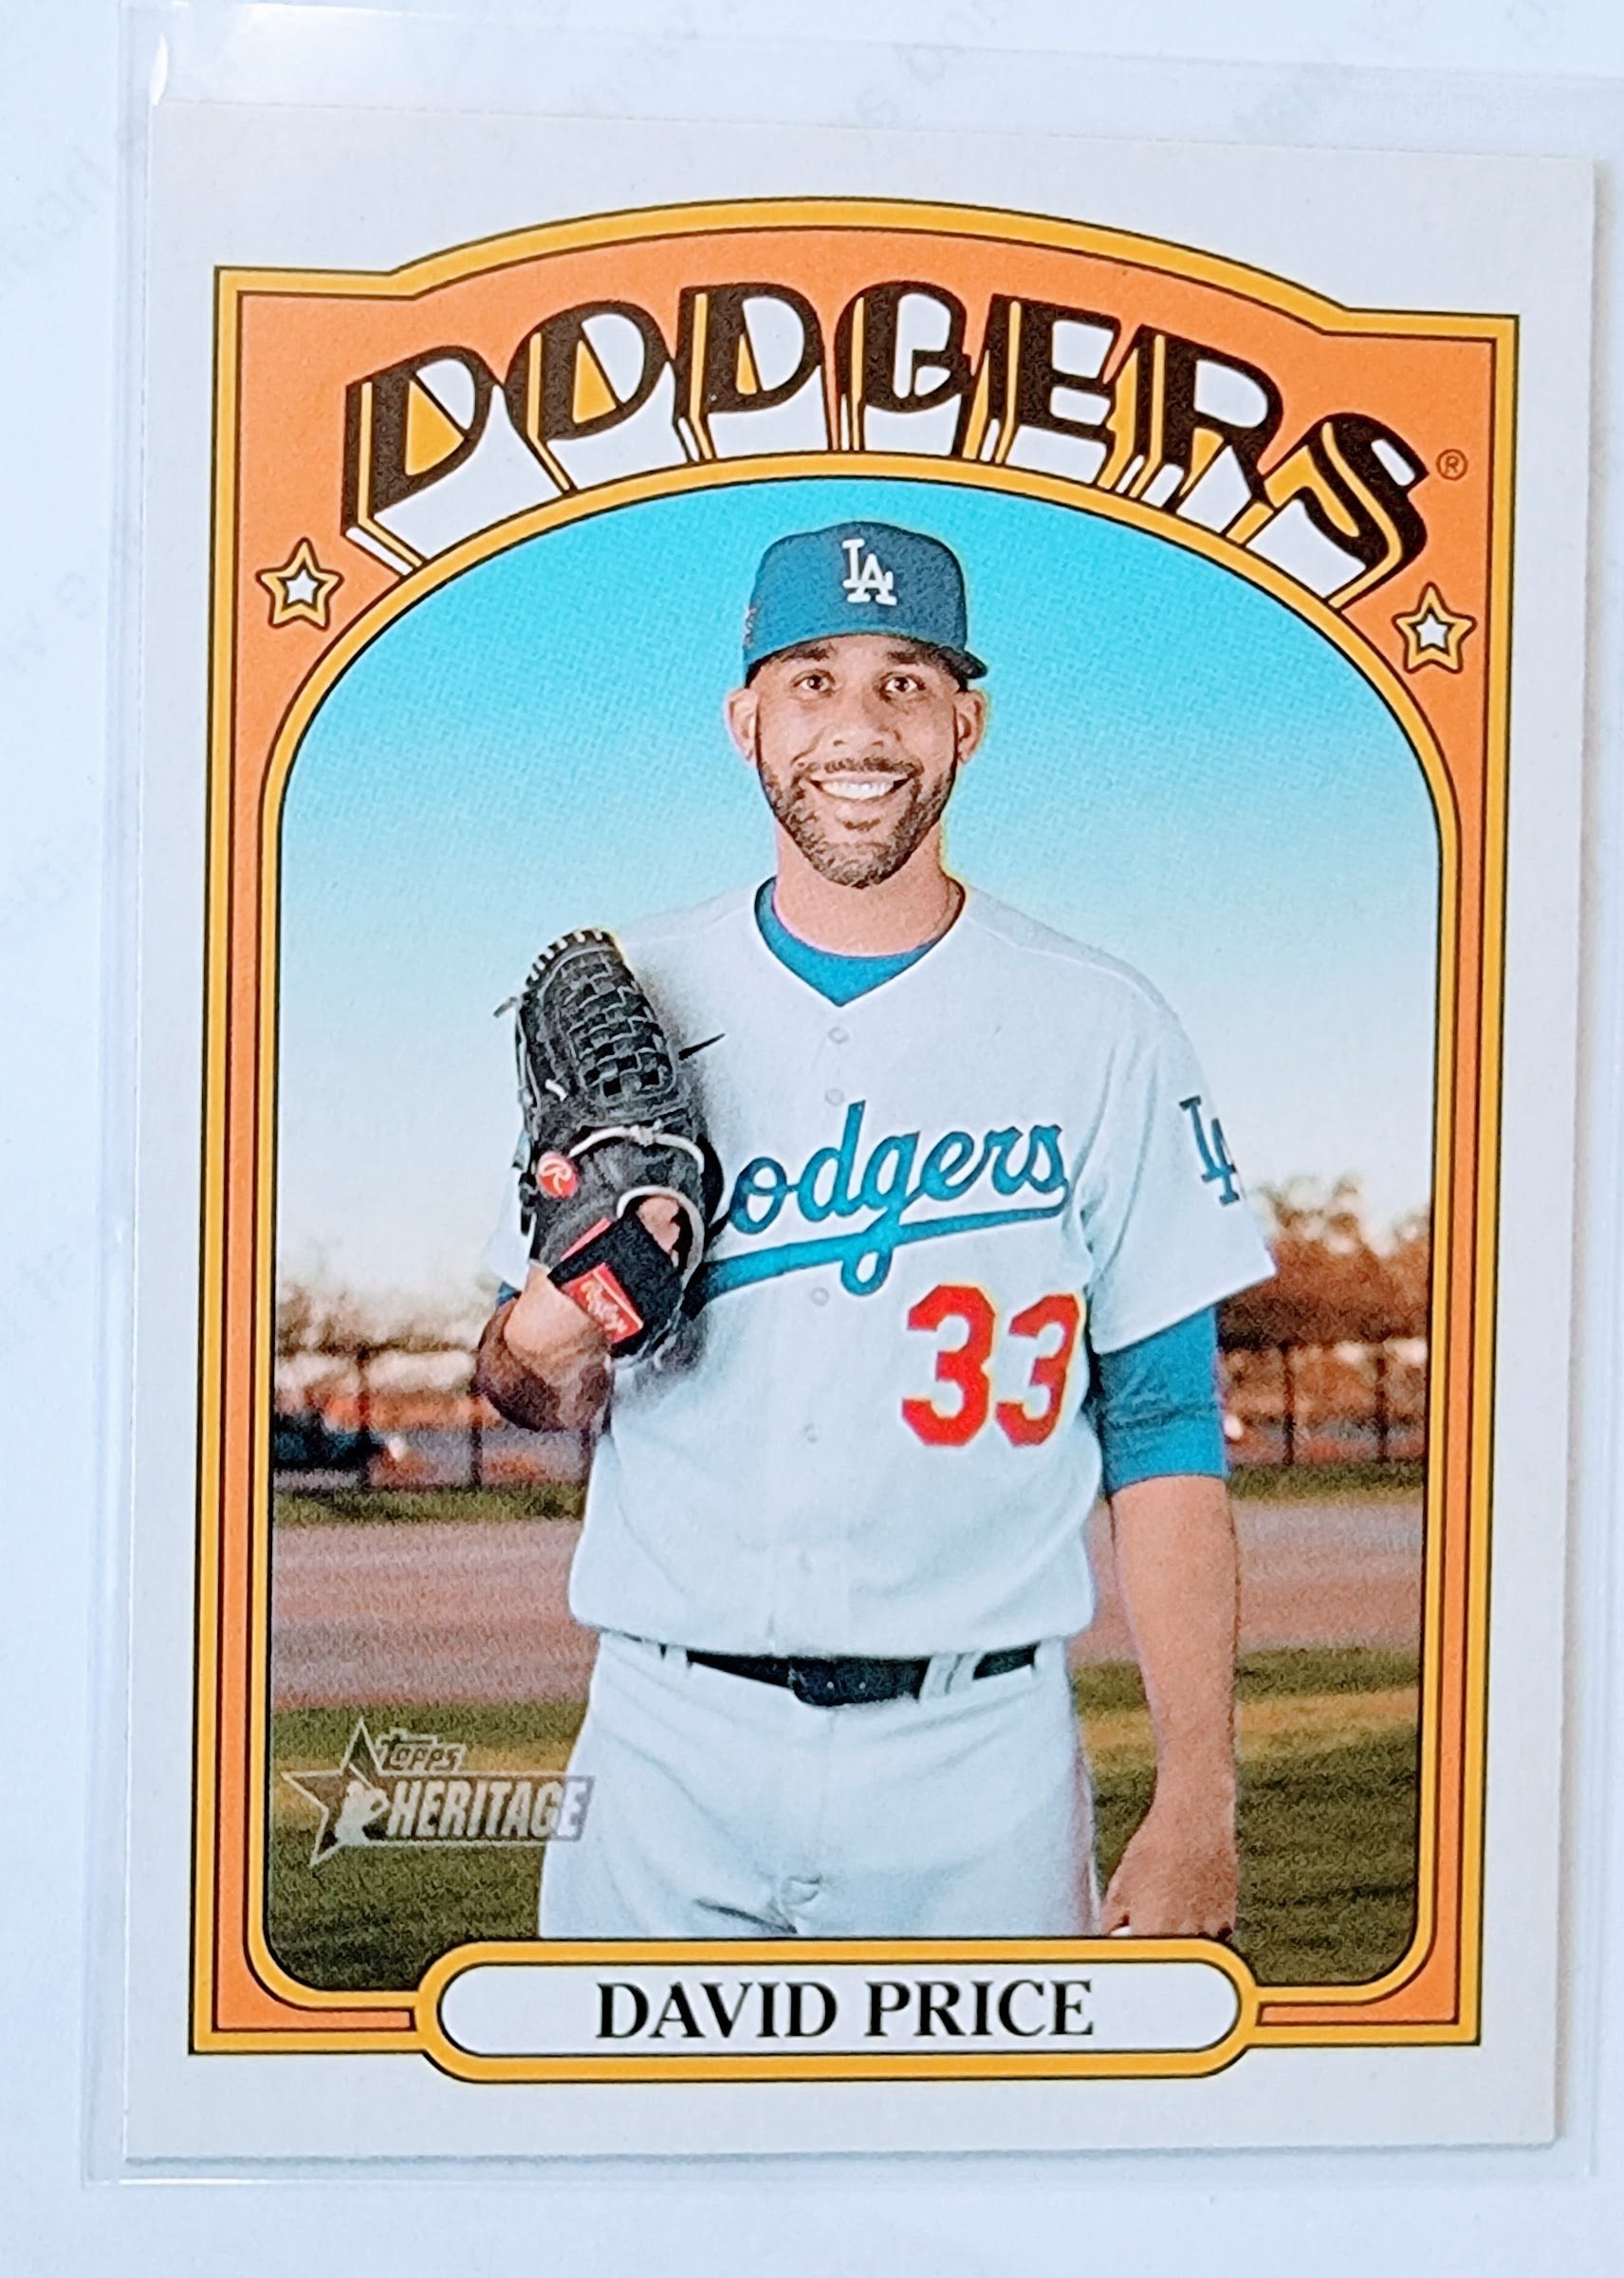 2021 Topps Heritage David Price Baseball Trading Card MCSC1 simple Xclusive Collectibles   